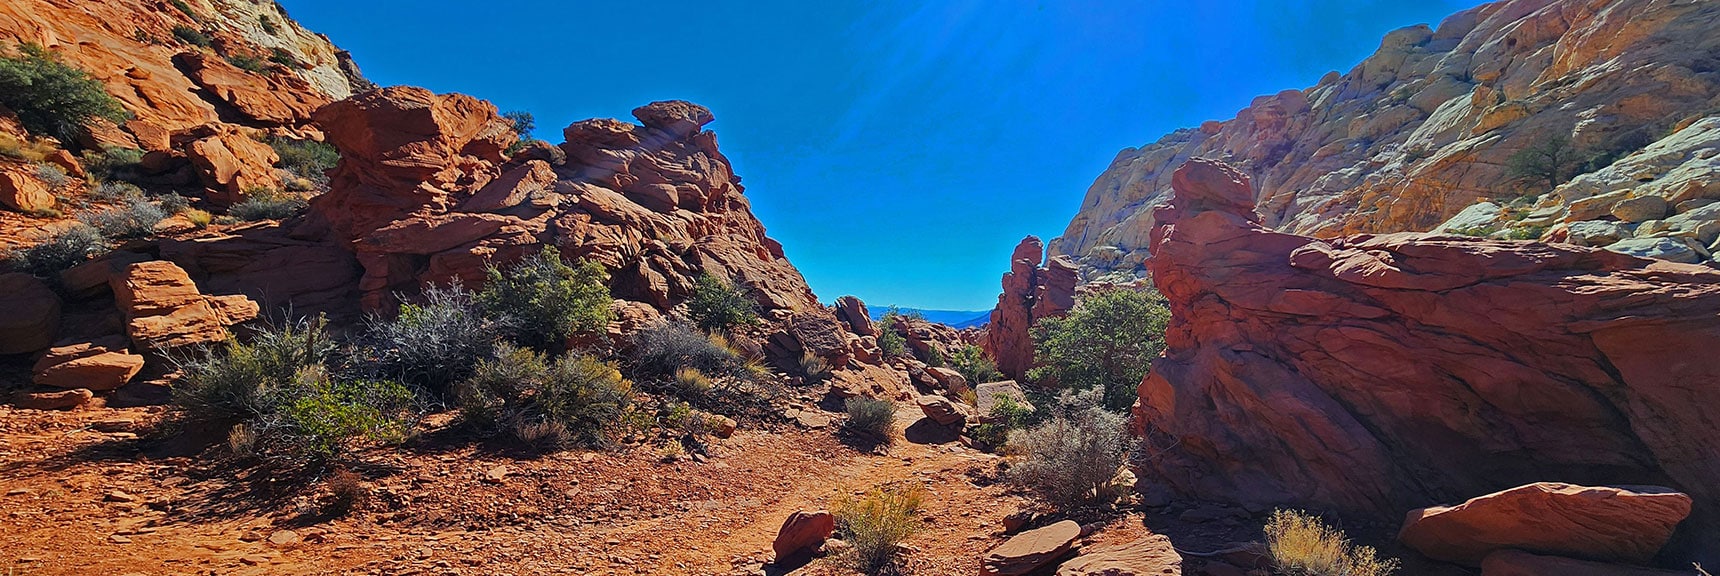 Combination of Aztec Red Sandstone Formations and Scattered Plants is Incredible | Pink Goblin Loop | Calico Basin, Nevada